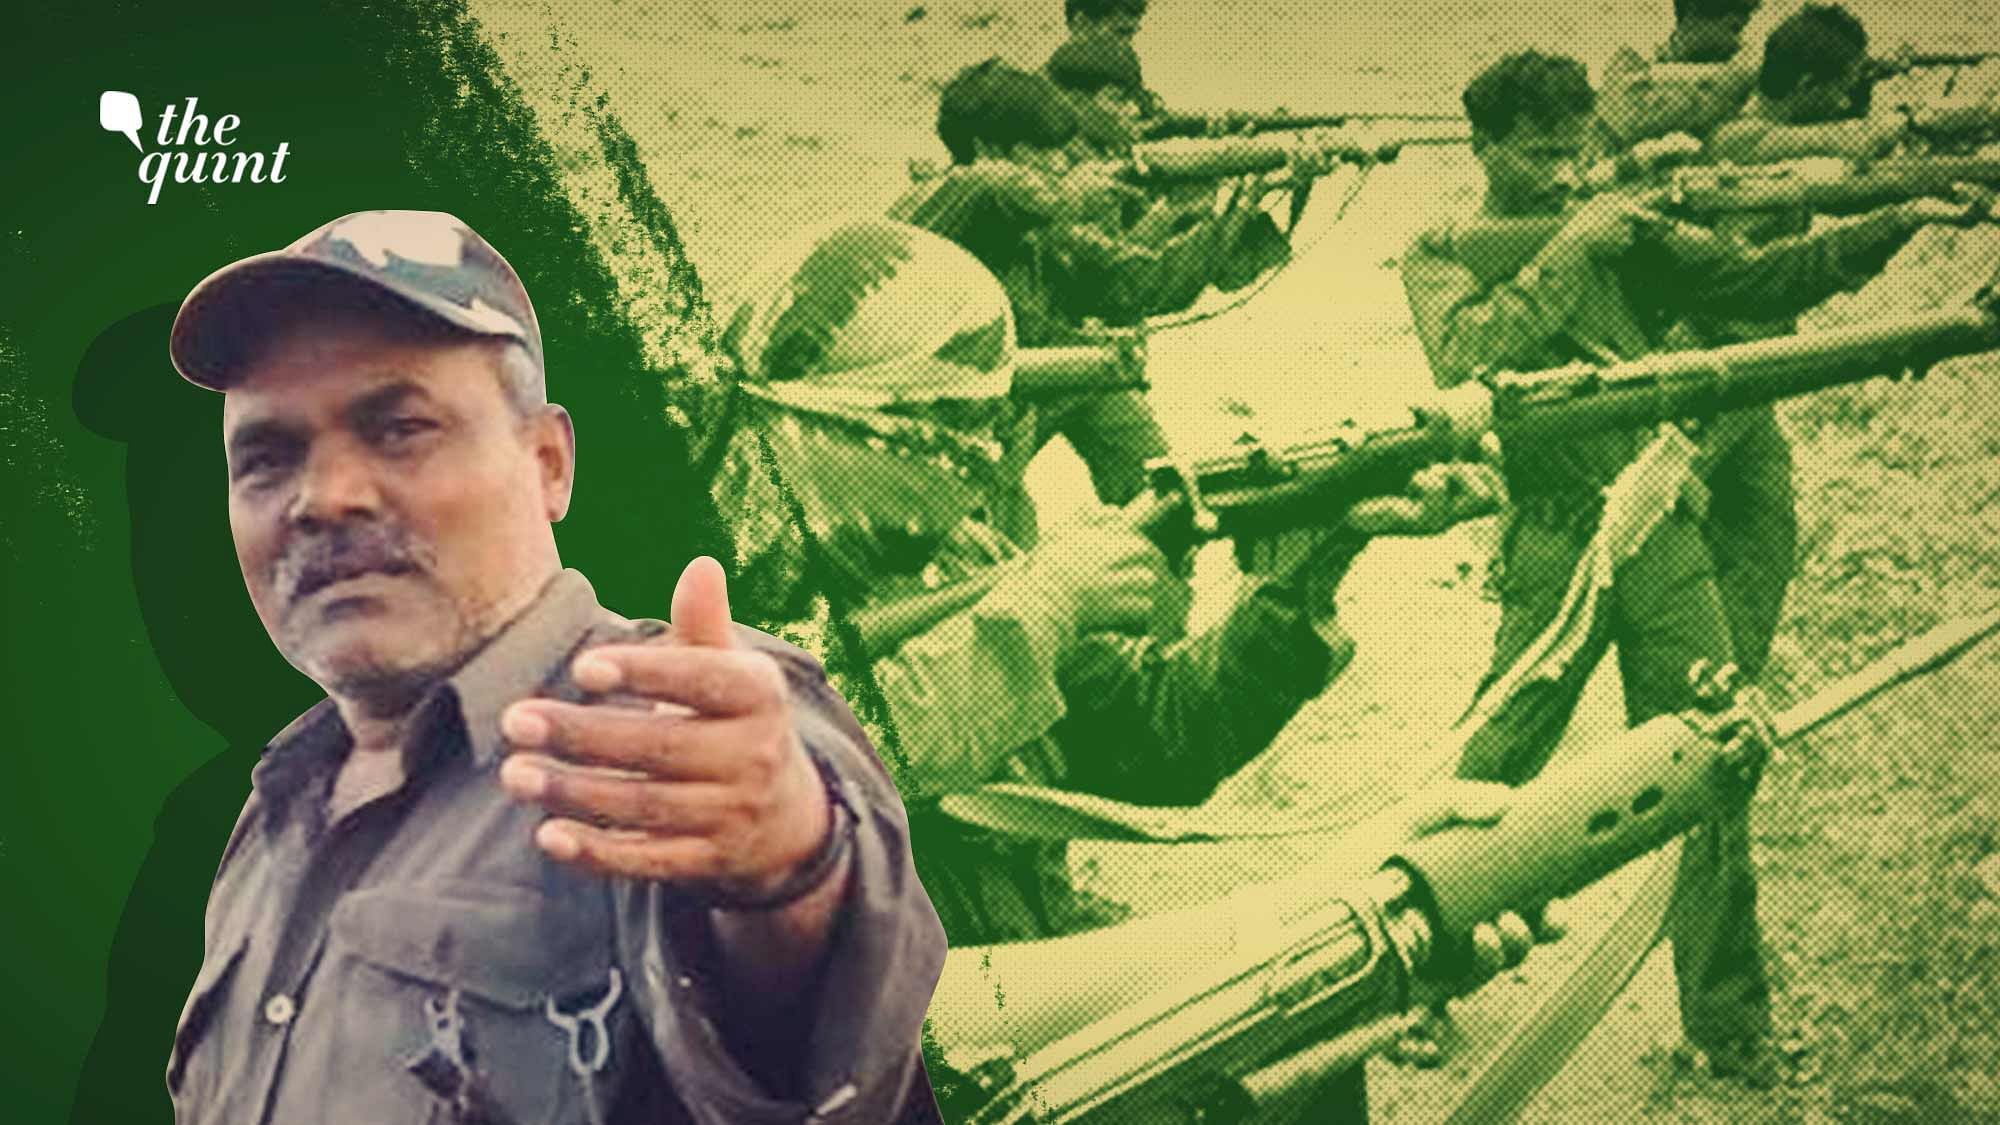 <div class="paragraphs"><p>Earlier this month, 26 Maoists, including <a href="https://www.thequint.com/news/india/who-was-milind-teltumbde-the-killed-maoist-with-a-rs-50-lakh-prize-on-his-head">Milind Baburao Teltumbde</a> alias Deepak Teltumbde, head of Maoists' newly formed Madhya Pradesh-Maharashtra-Chhattisgarh zone, were killed in Gadchiroli, Maharashtra.</p></div>